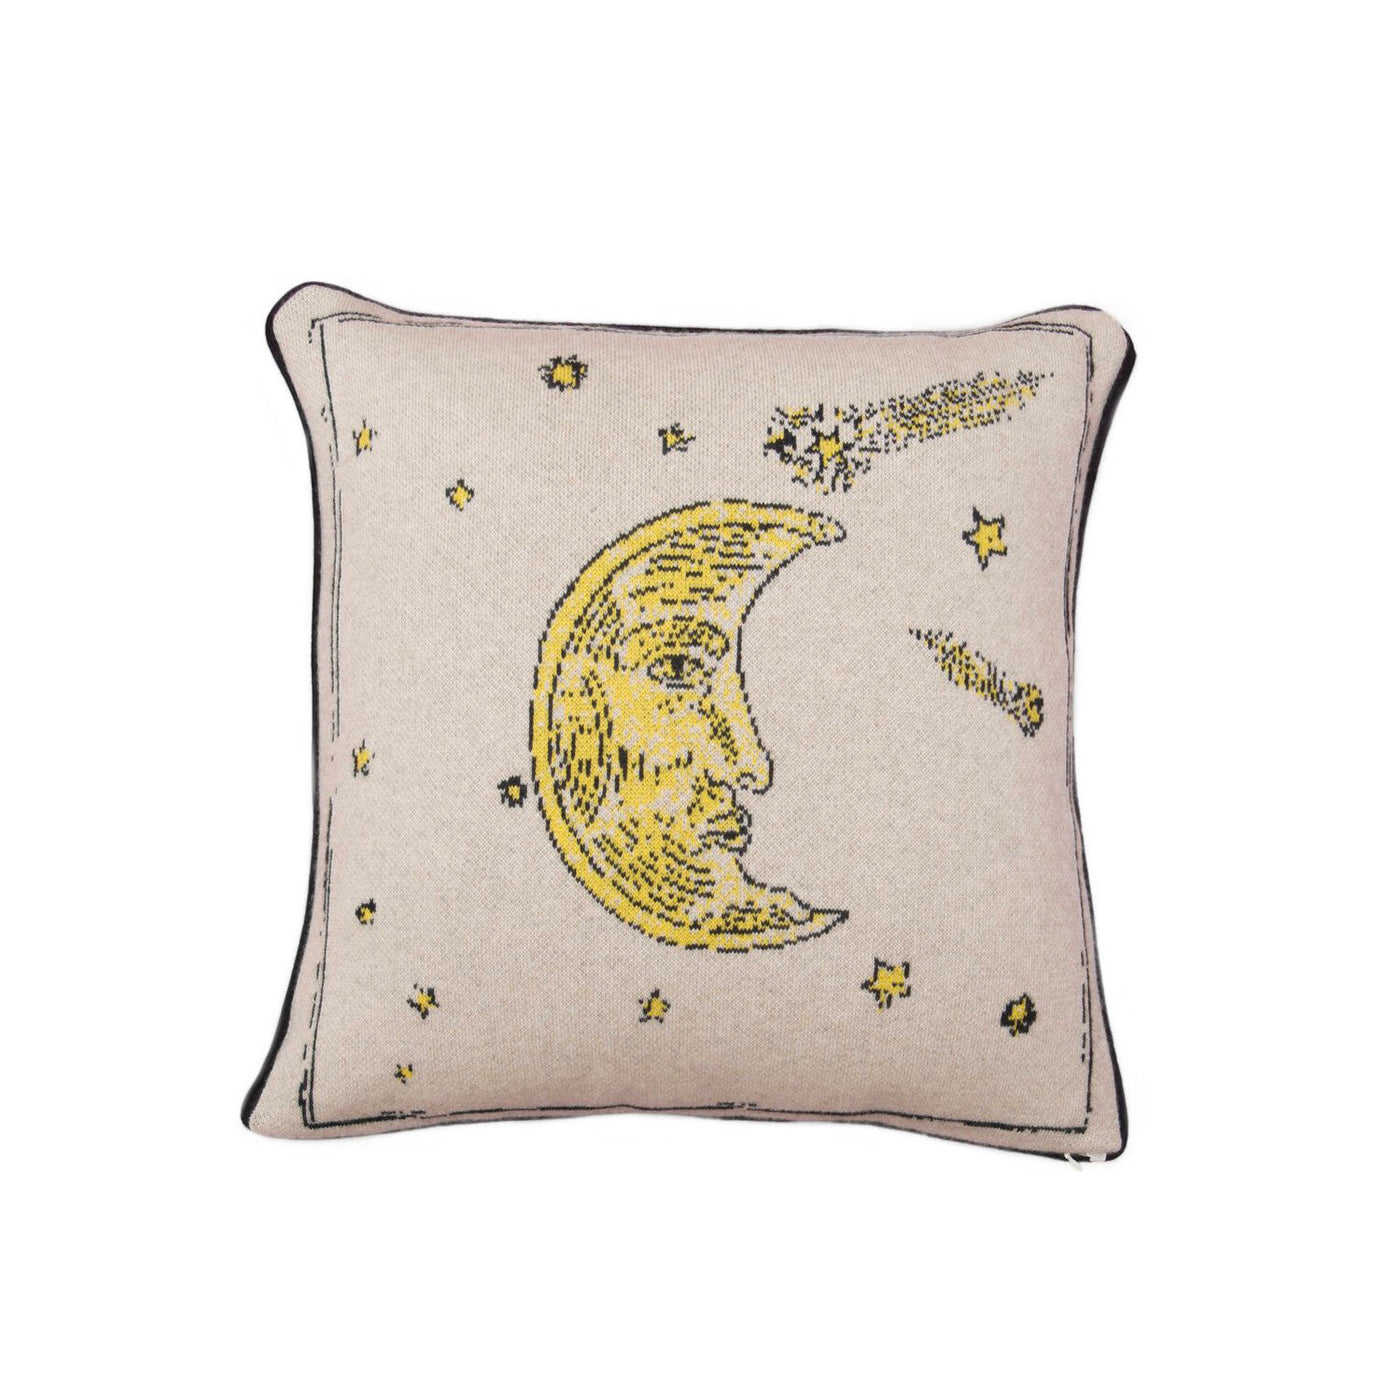 Man In The Moon Cashmere Pillow